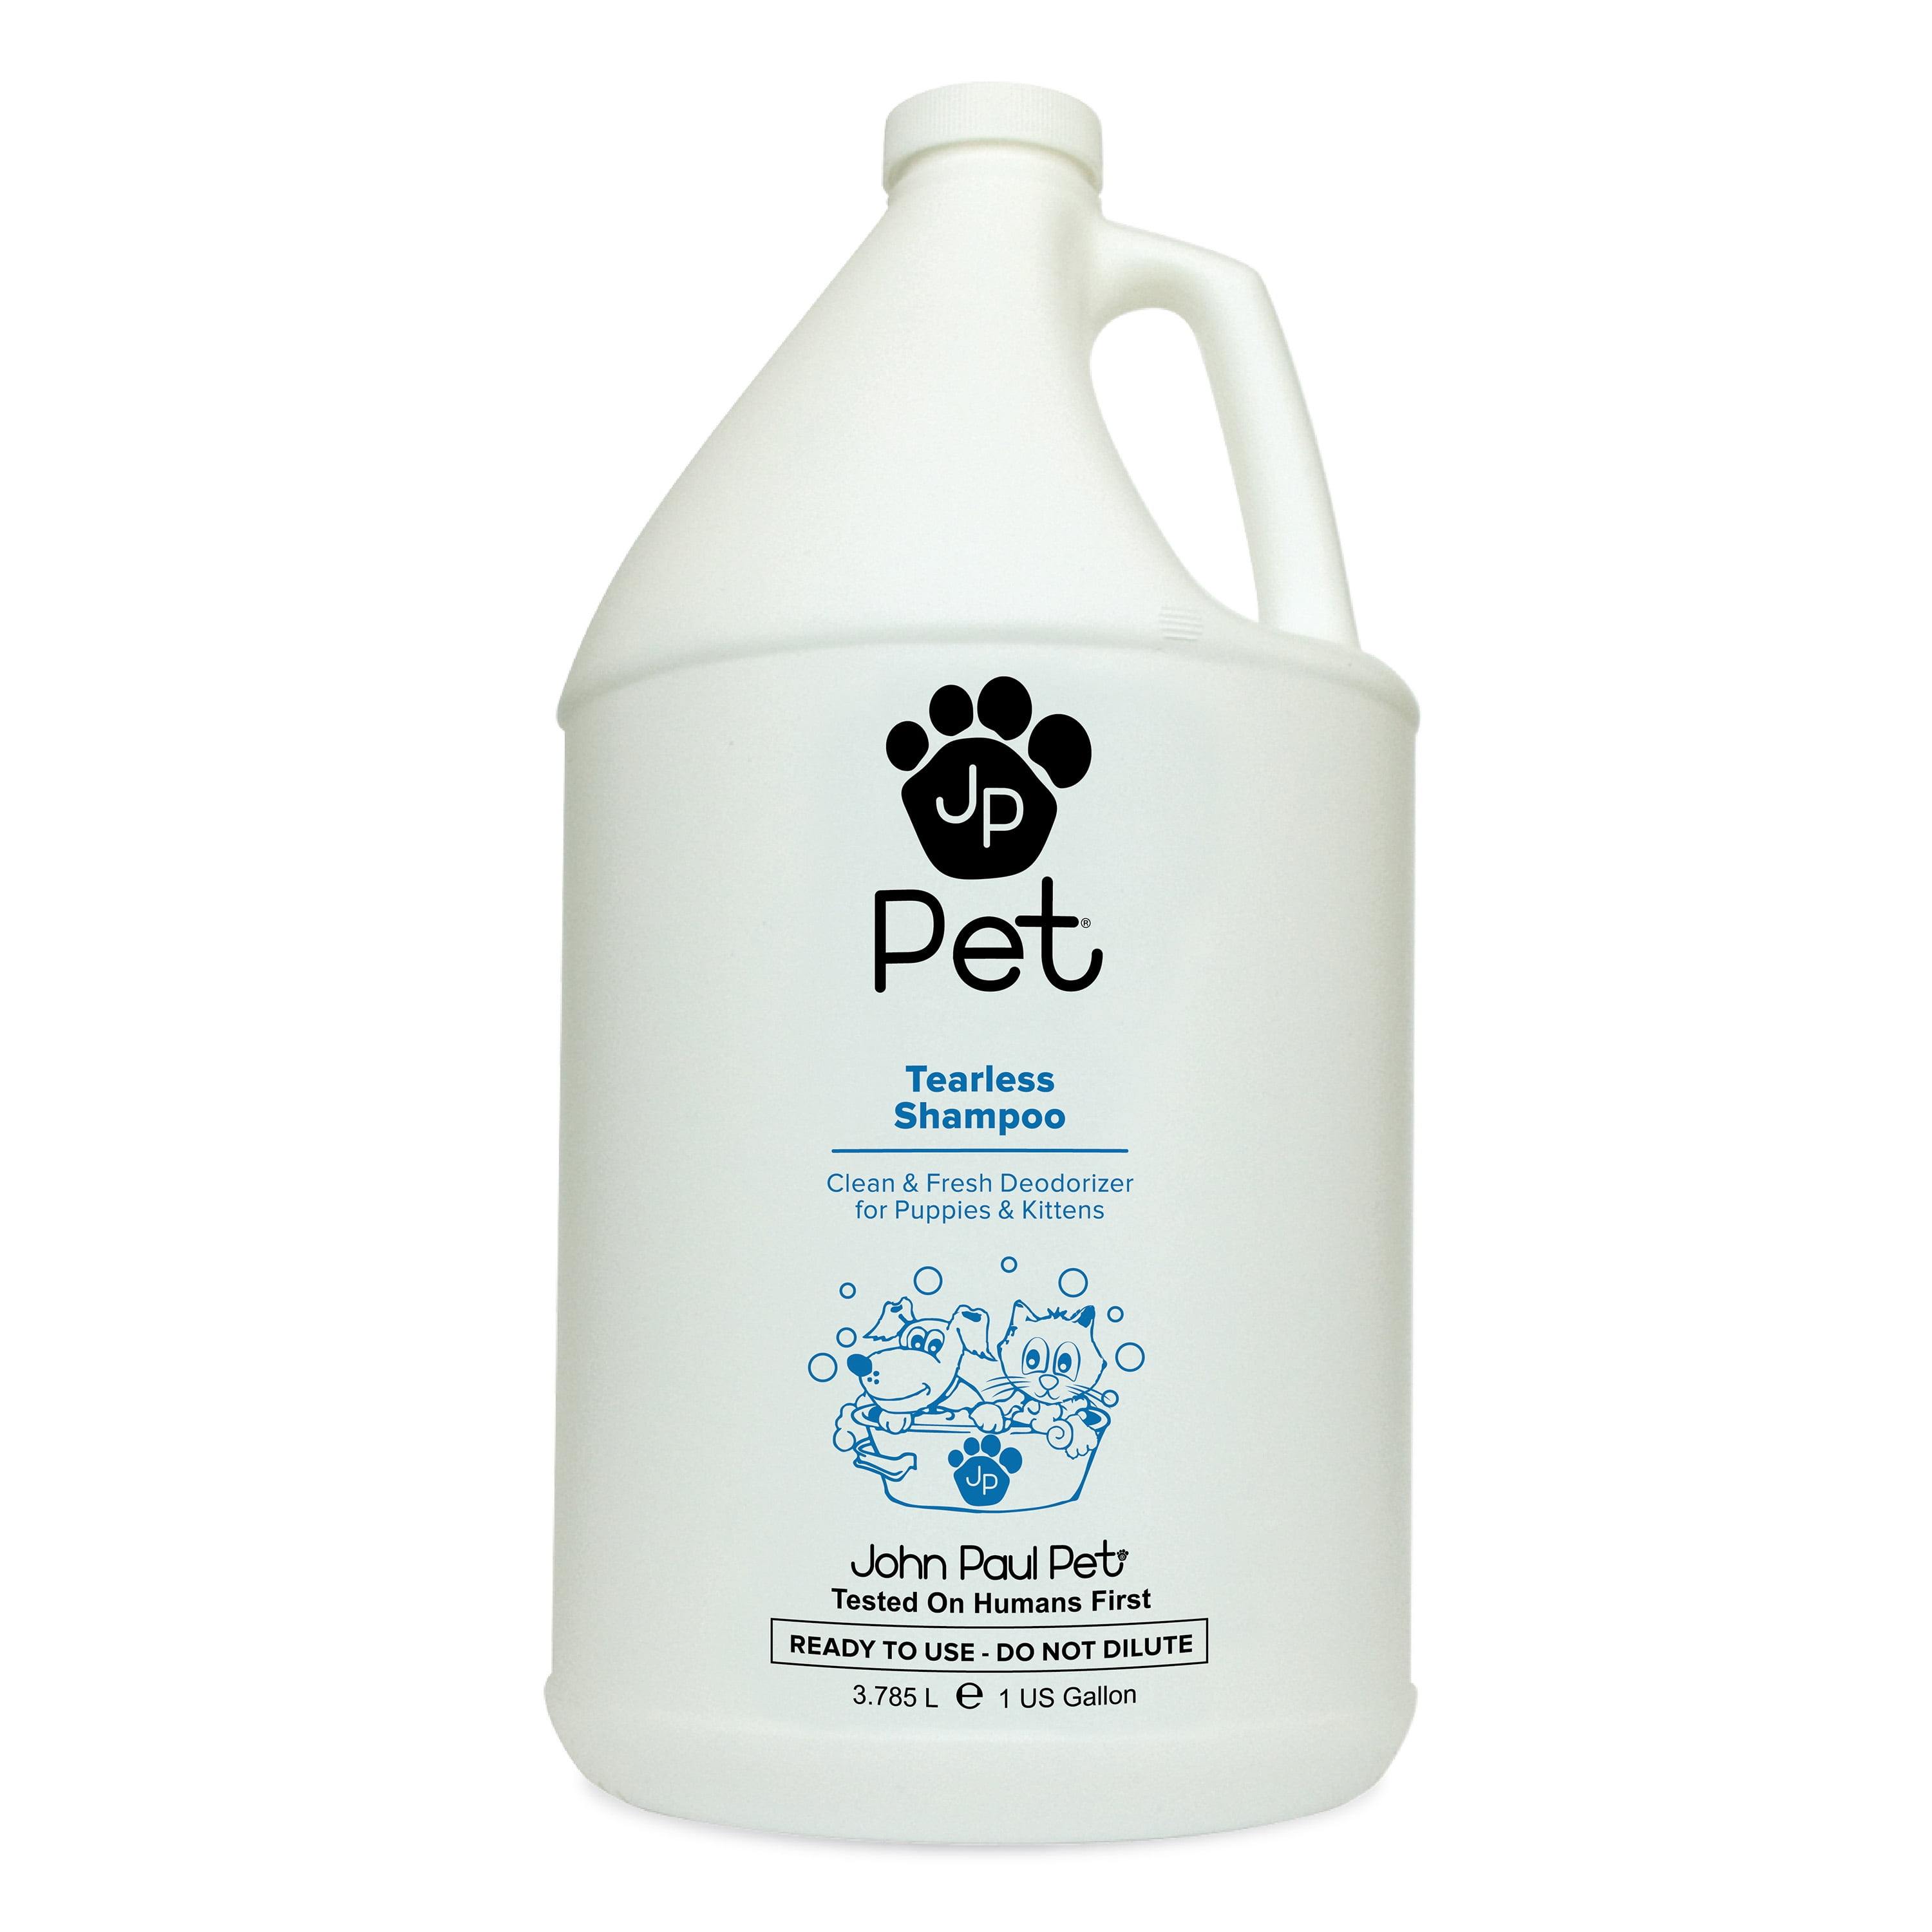 John Paul Pet Tearless Odor Absorbing Shampoo, Clean and Fresh Low PH for Puppies, Dogs, Kittens and Cats, 1-Gallon - Walmart.com